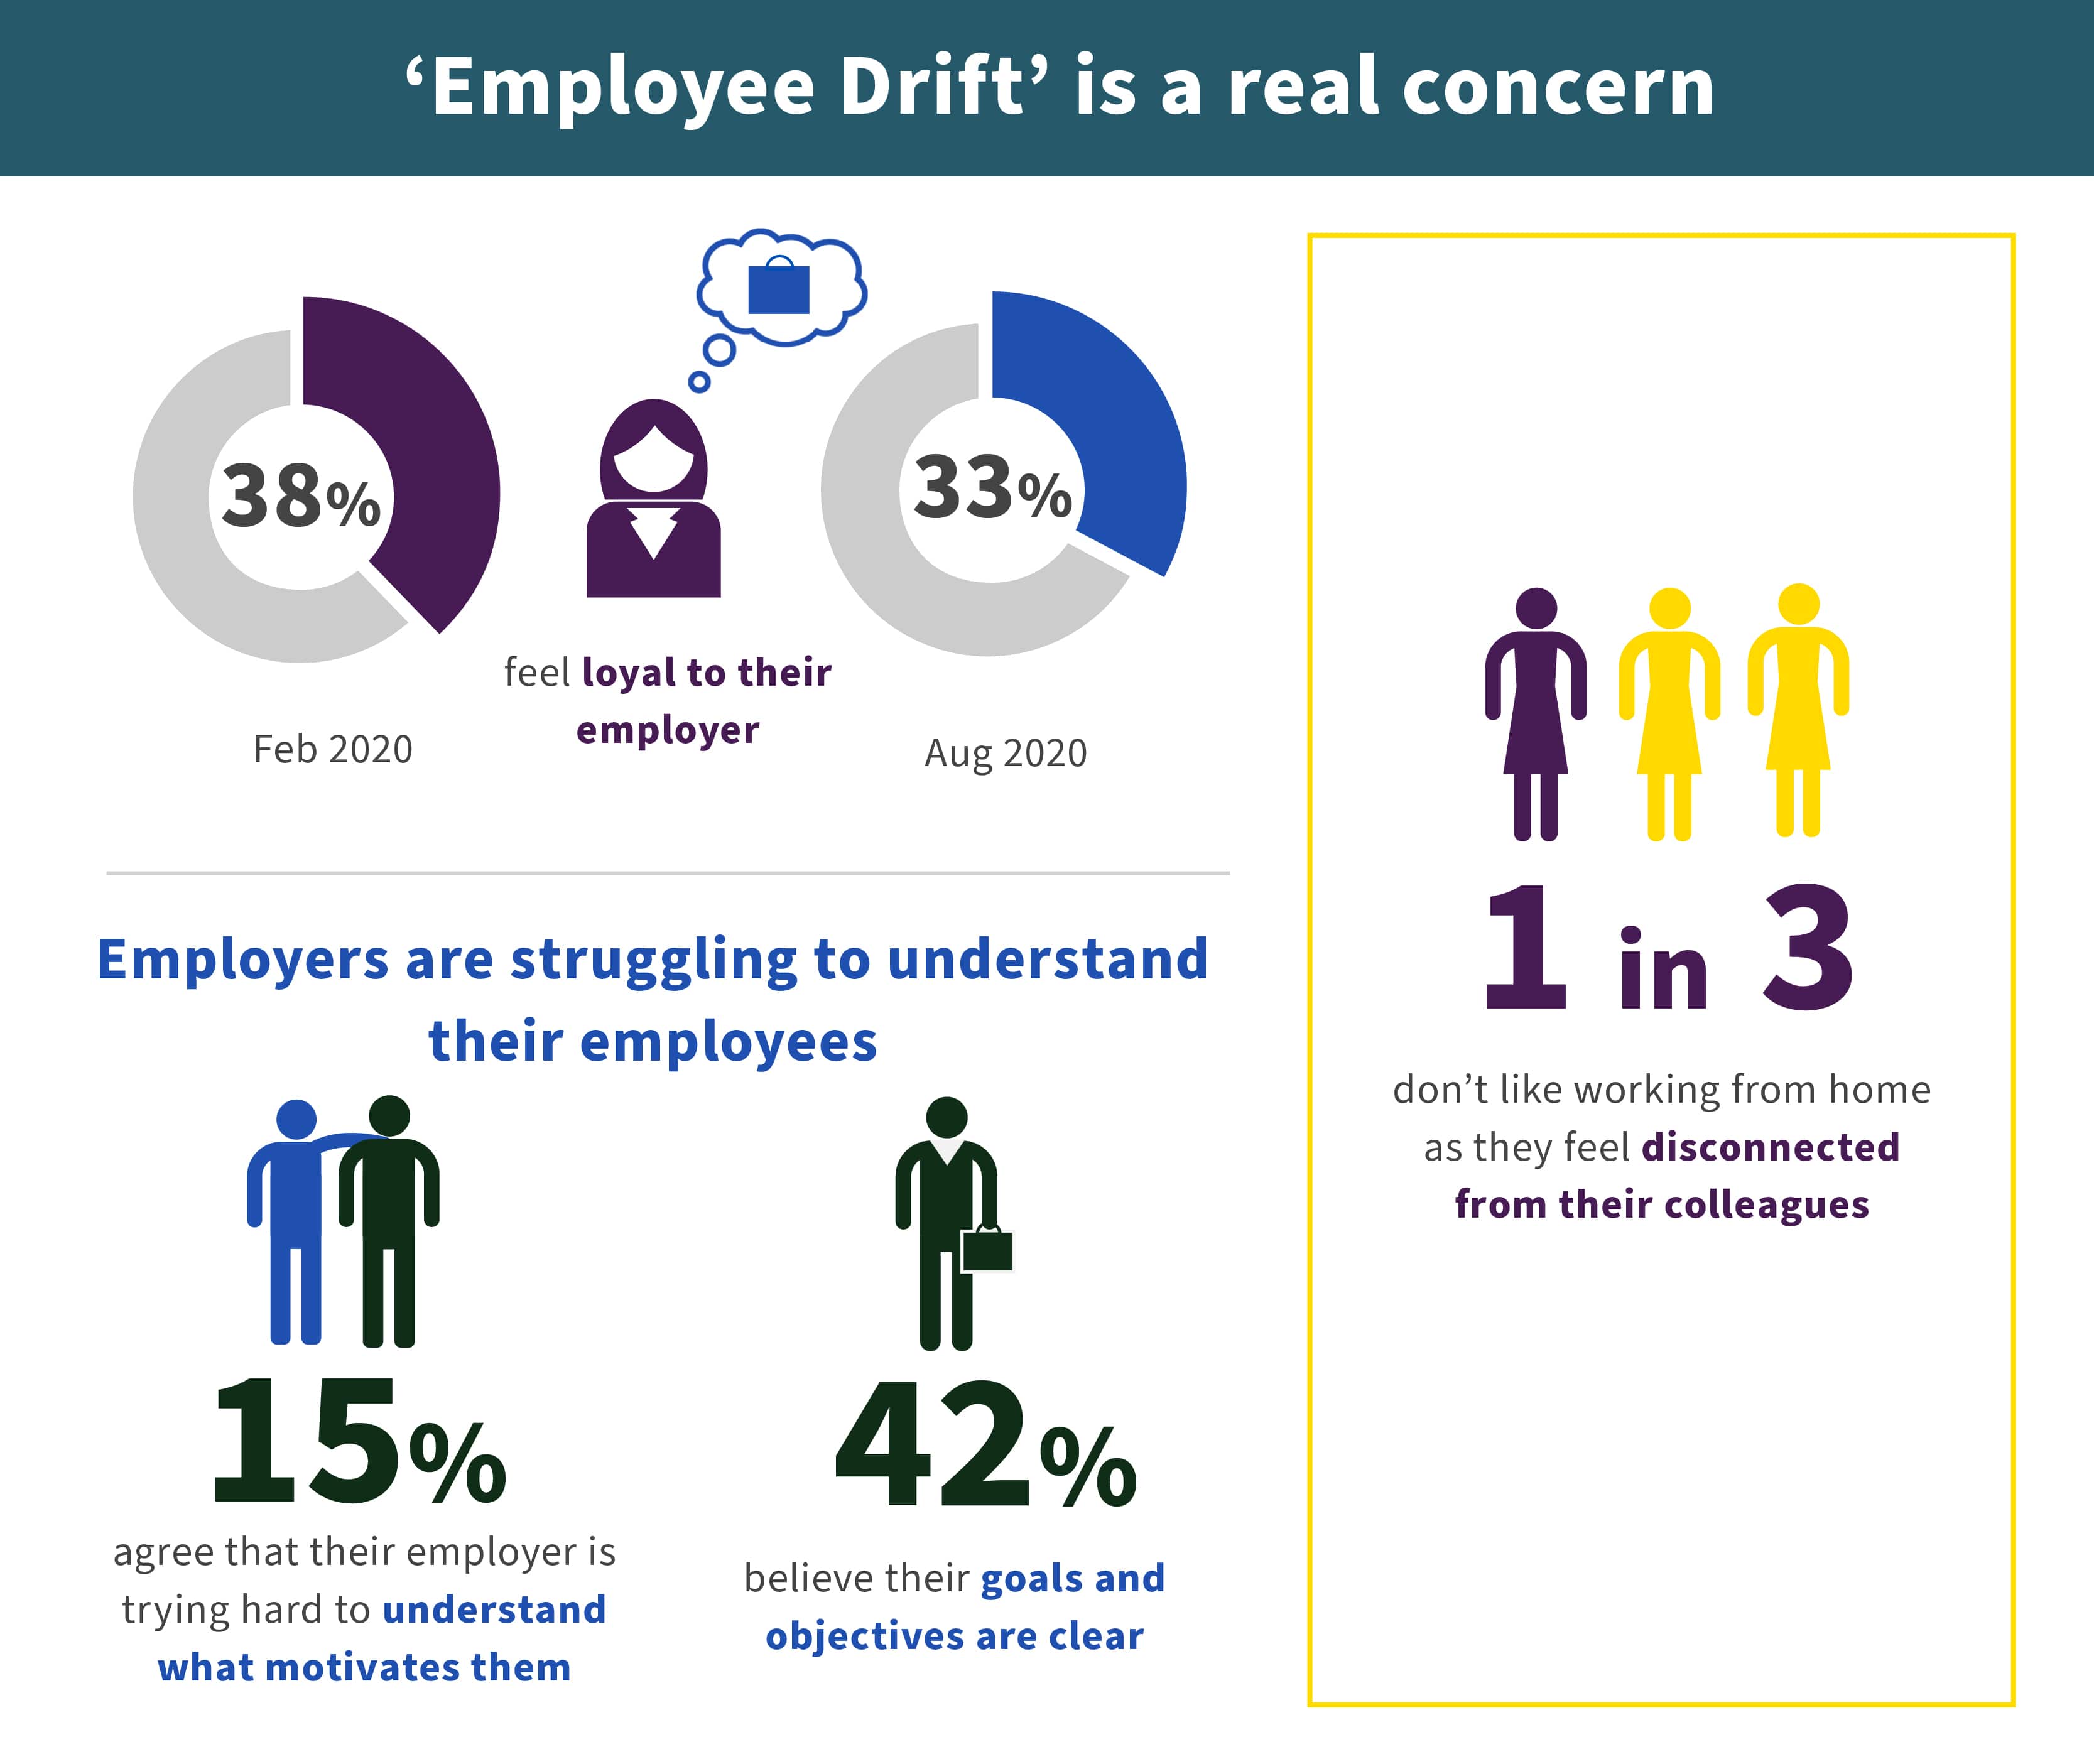 'Employee Drift' is a real concern